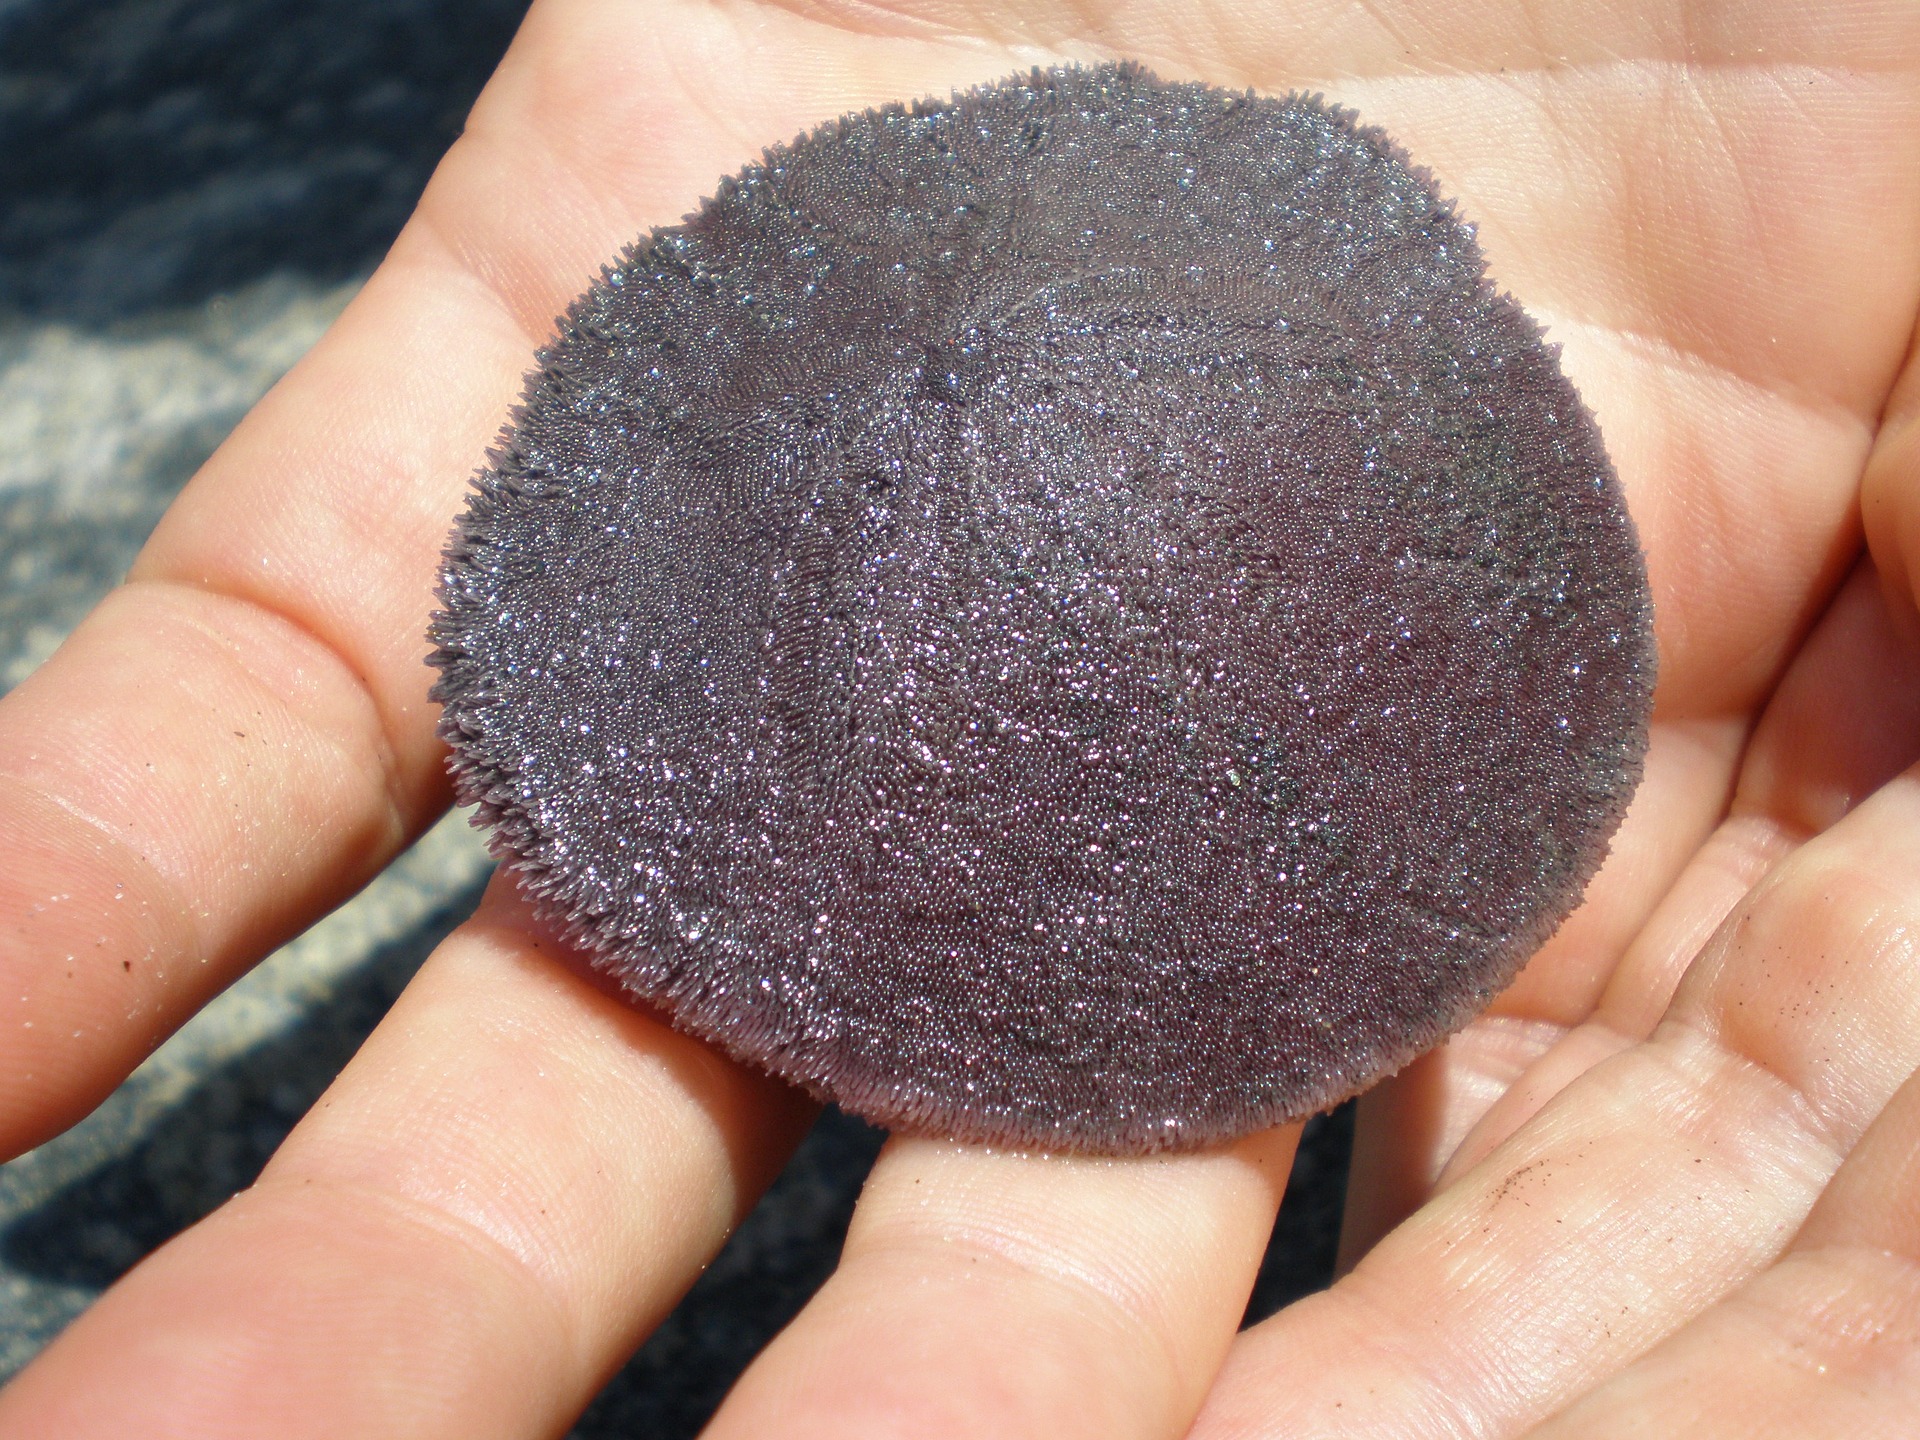 Sand Dollar - Facts and Beyond